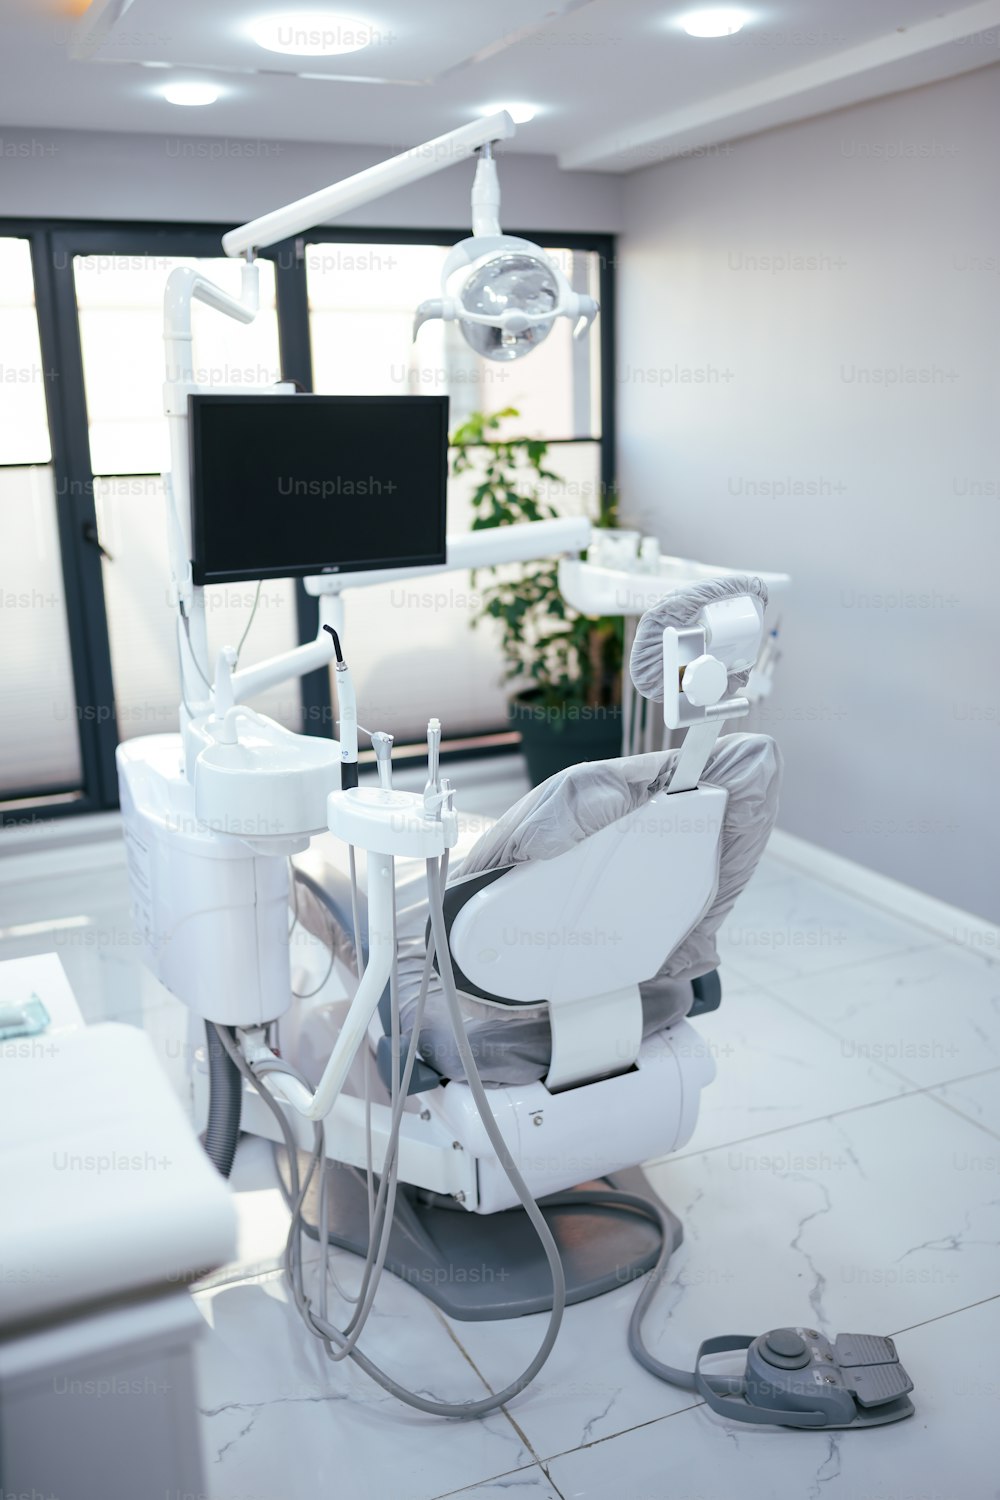 a dentist chair with a monitor and lights in a room